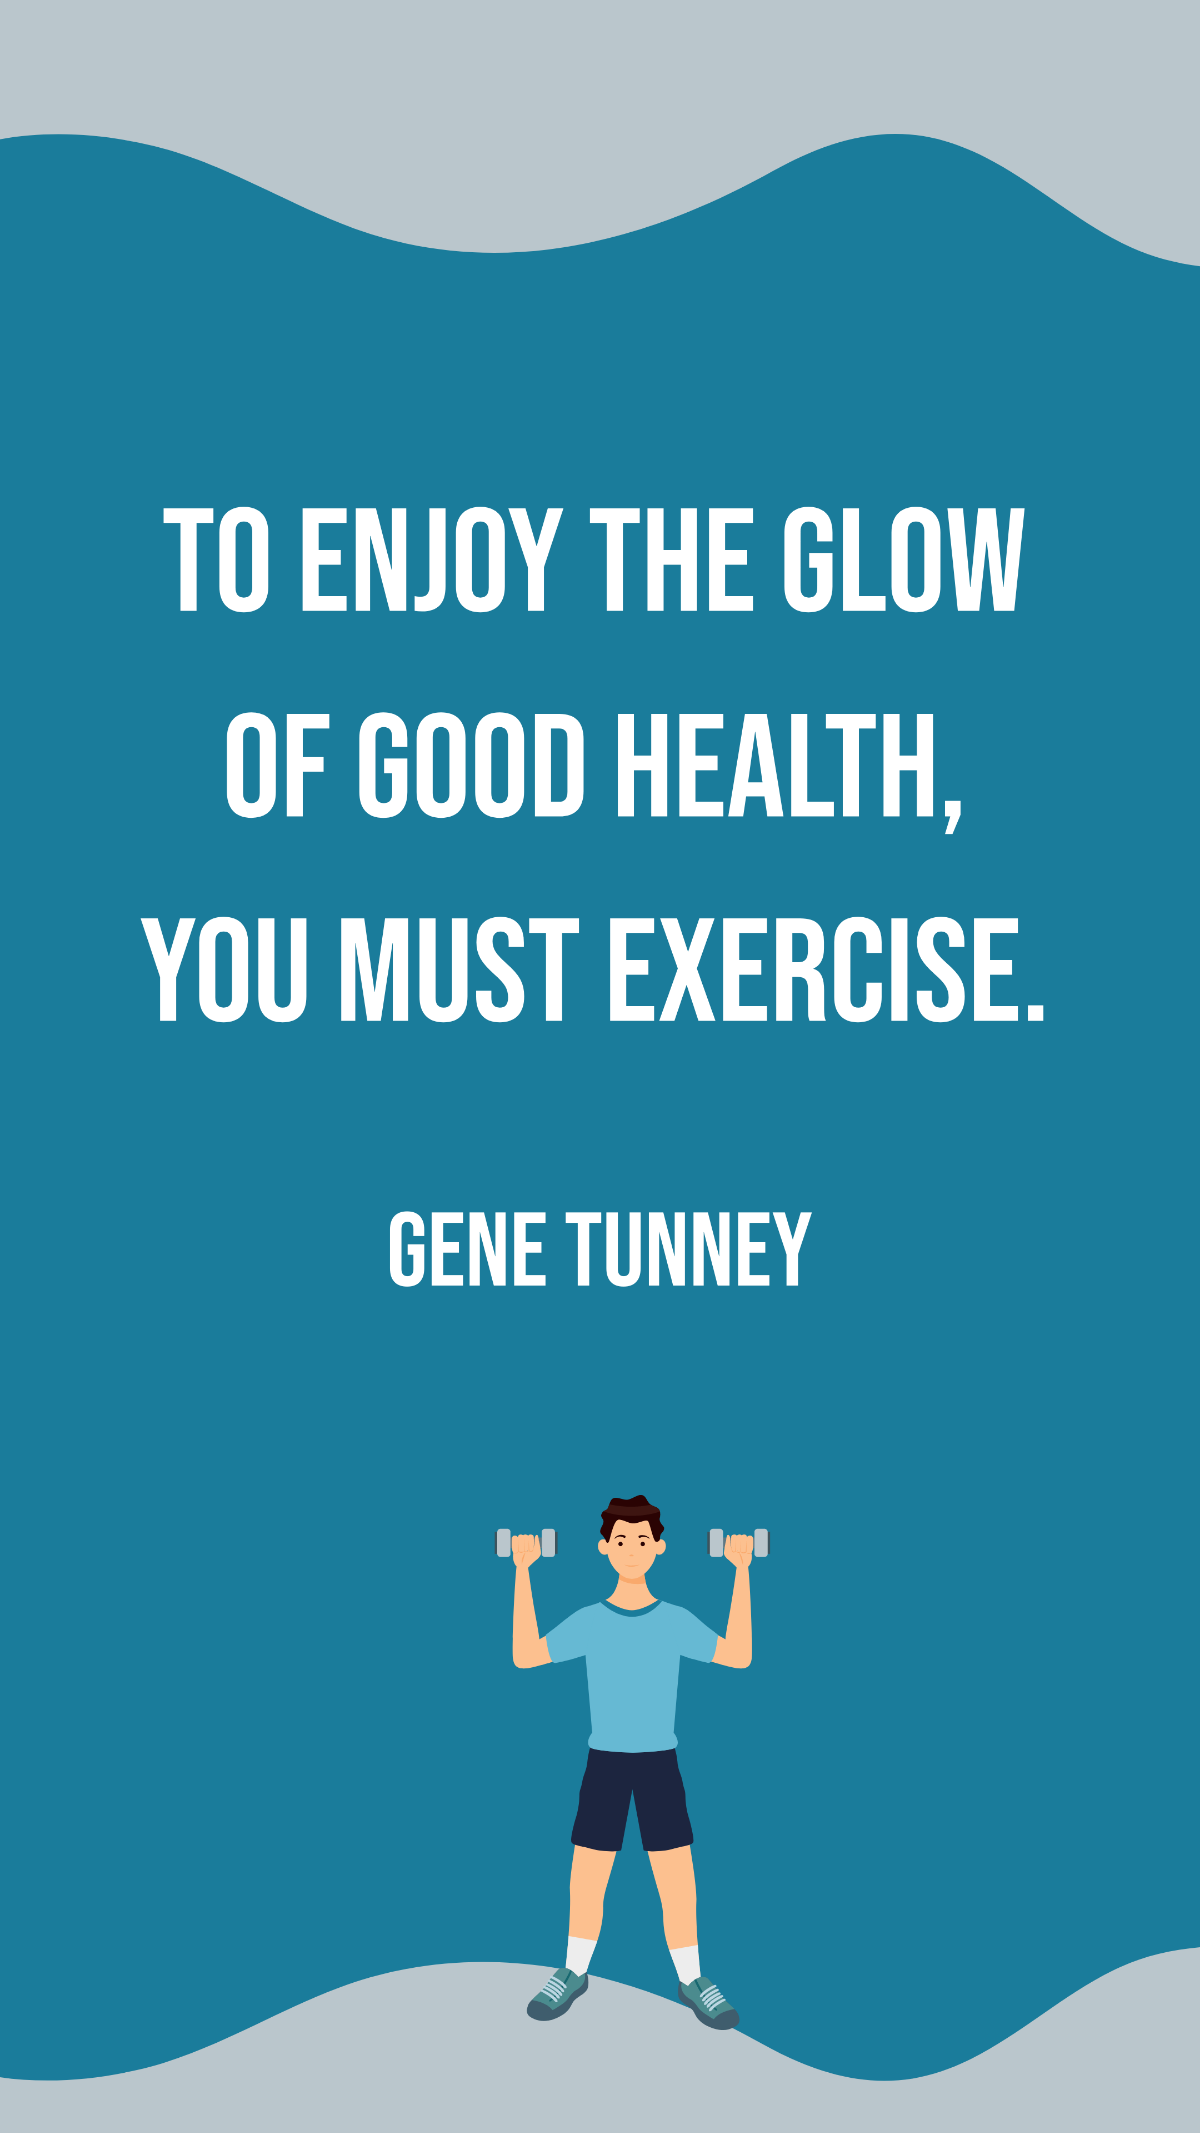 Free Gene Tunney - To enjoy the glow of good health, you must exercise. Template